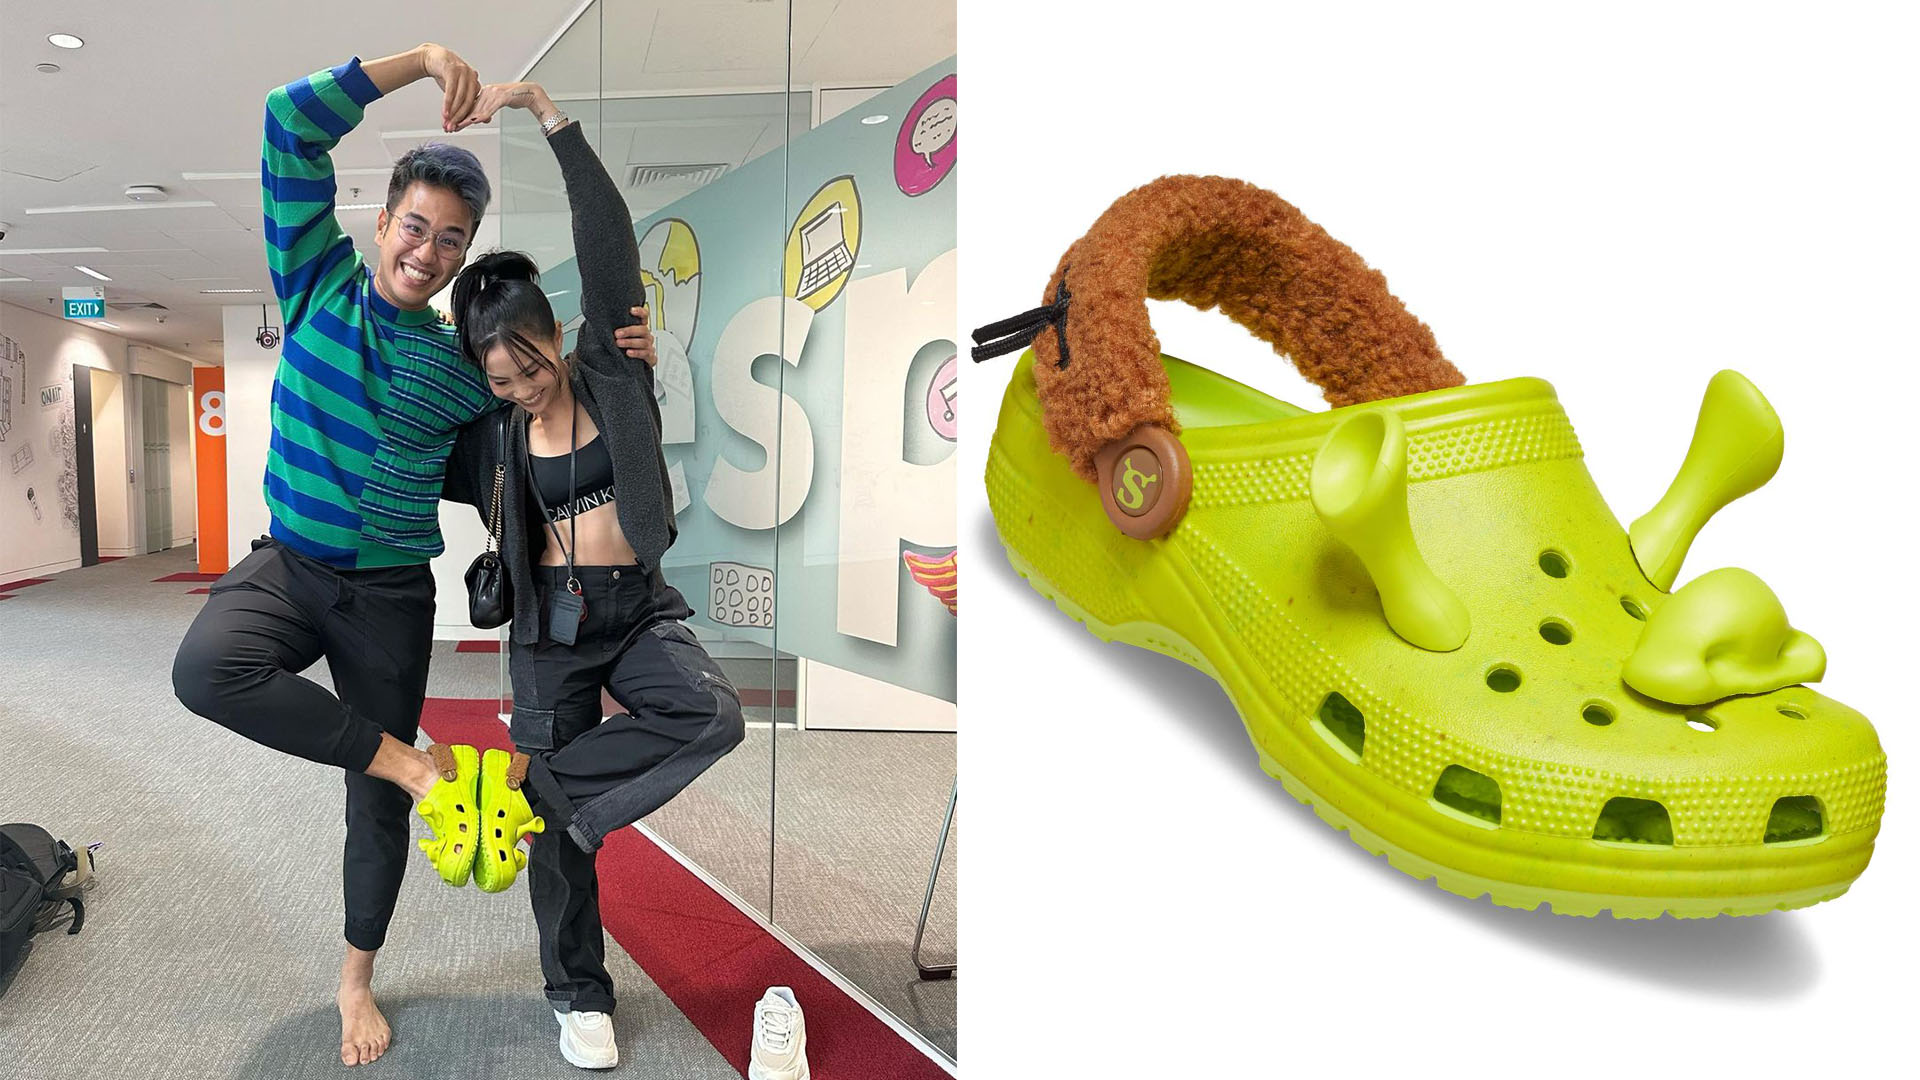 How To Build Your Own Dupe Of The Sold-Out Shrek Crocs Seen On